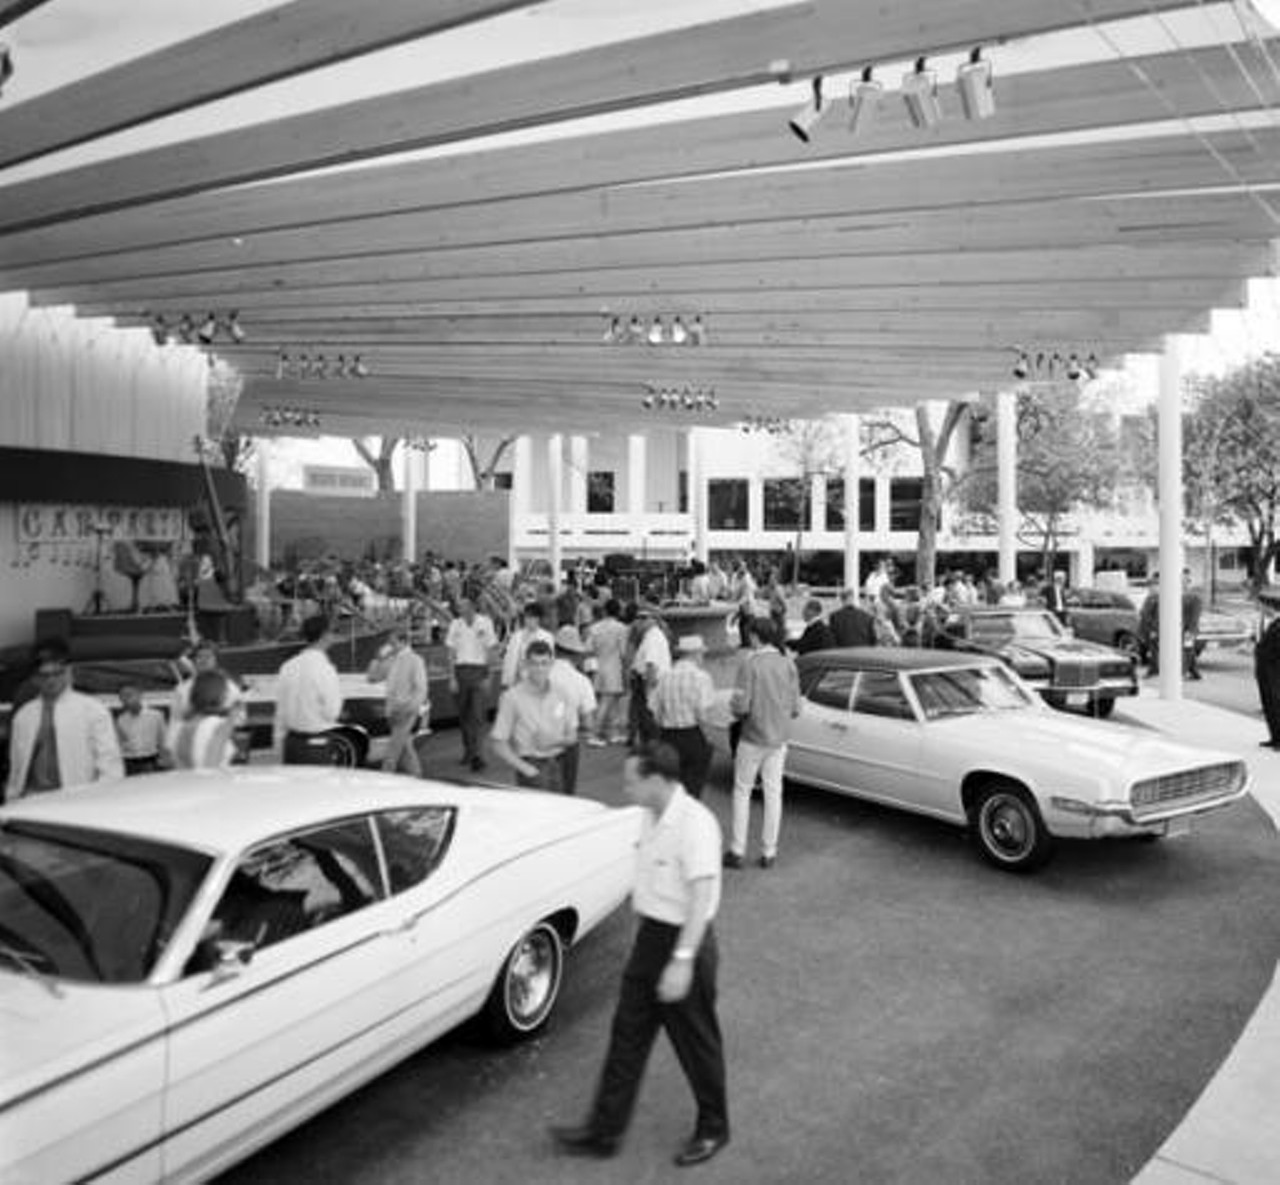 Current Automobiles on Display at Ford Motor Company, 1968
The above photograph was taken under the Ford Motor Company Pavilion during the World’s Fair.
Photo via Zintgraff Studio Photo Collection